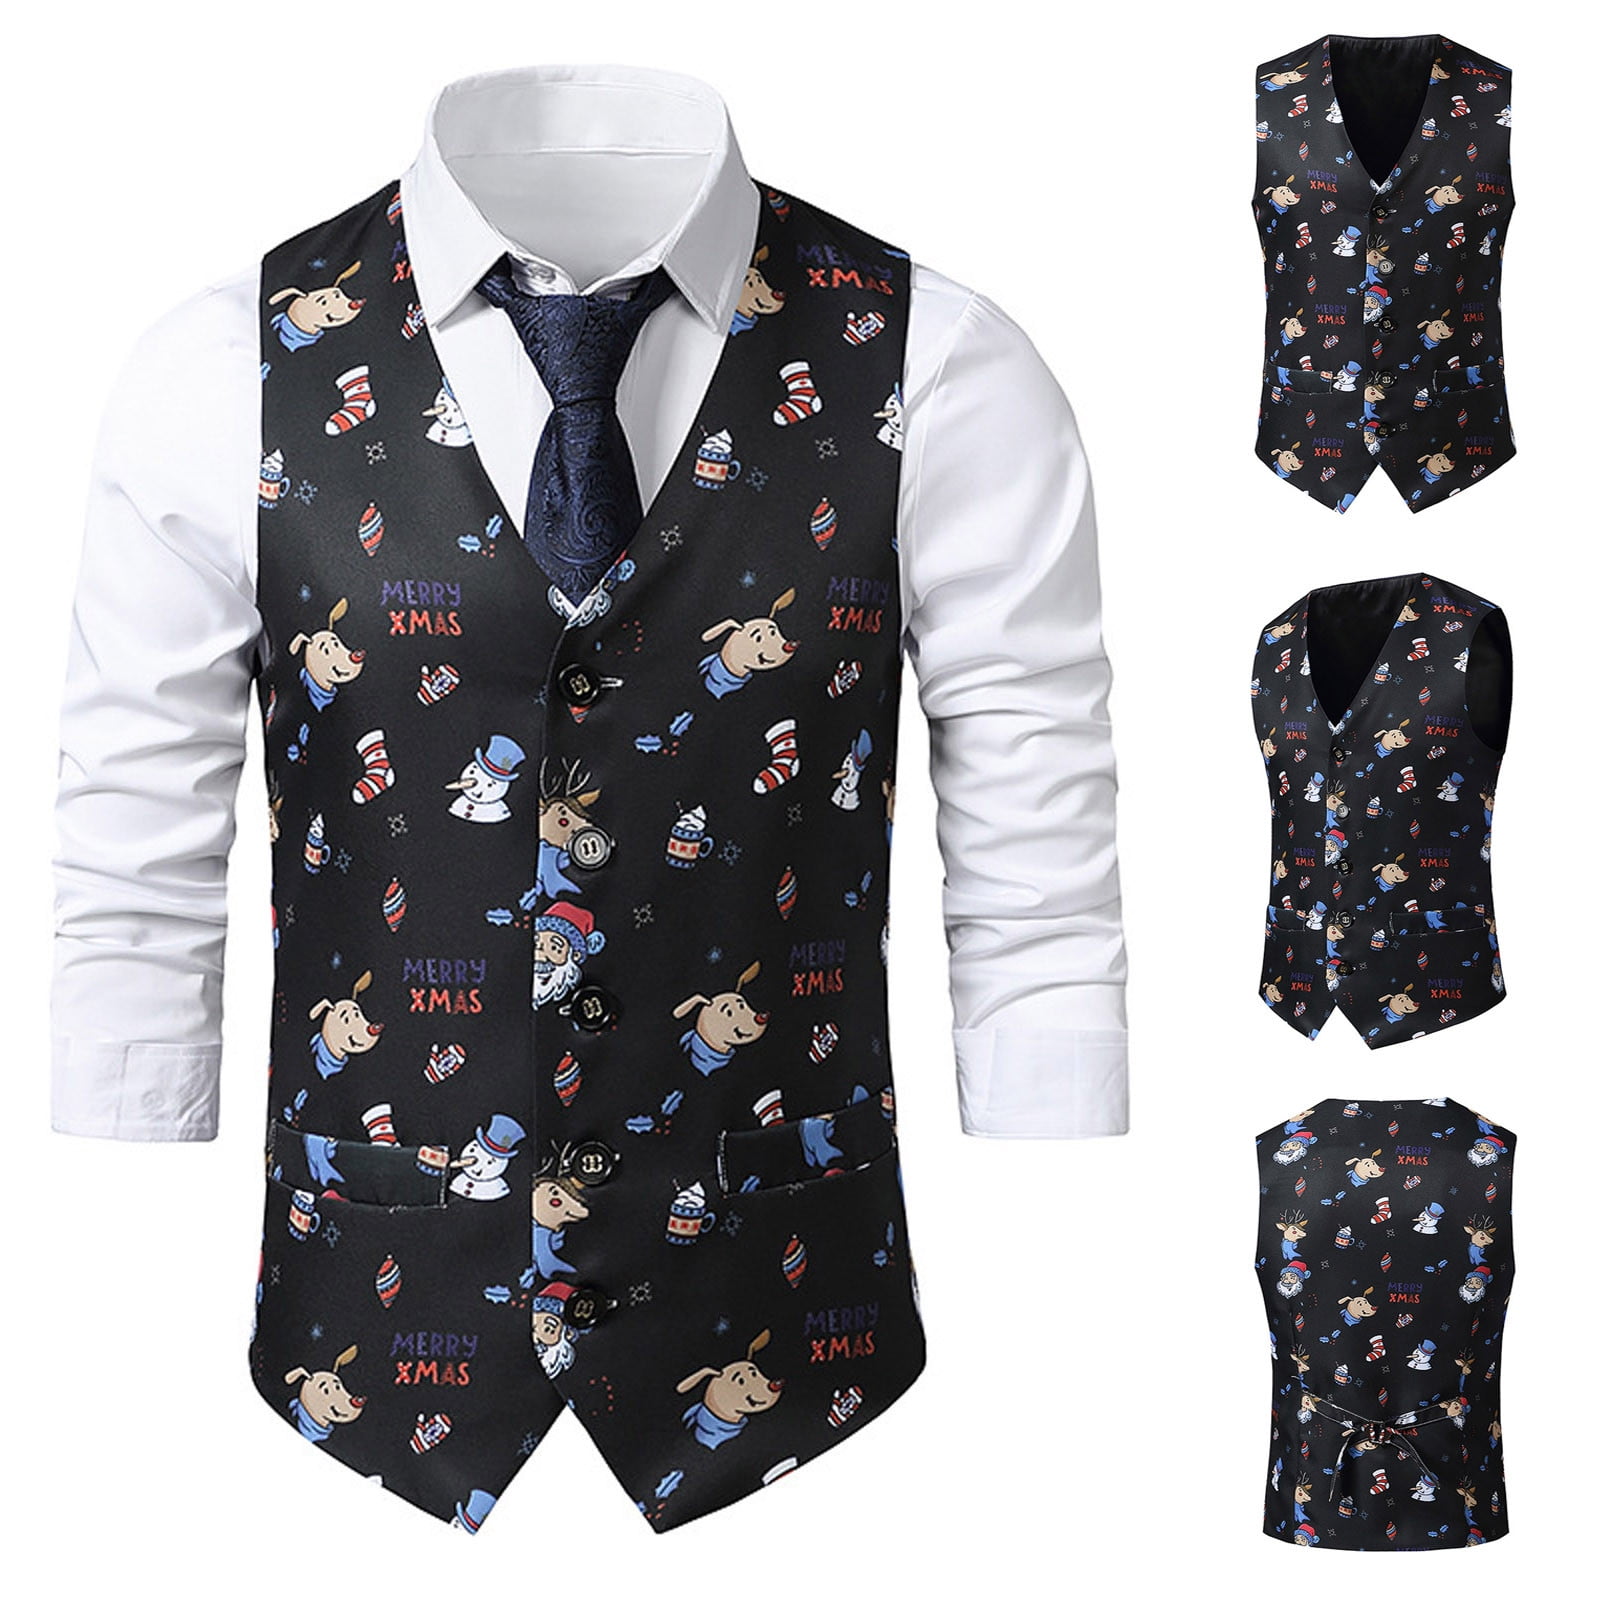 Men's Autumn And Winter Casual Christmas Printed Single- Suit Vest Note  Please Buy One Or Two Sizes Larger 